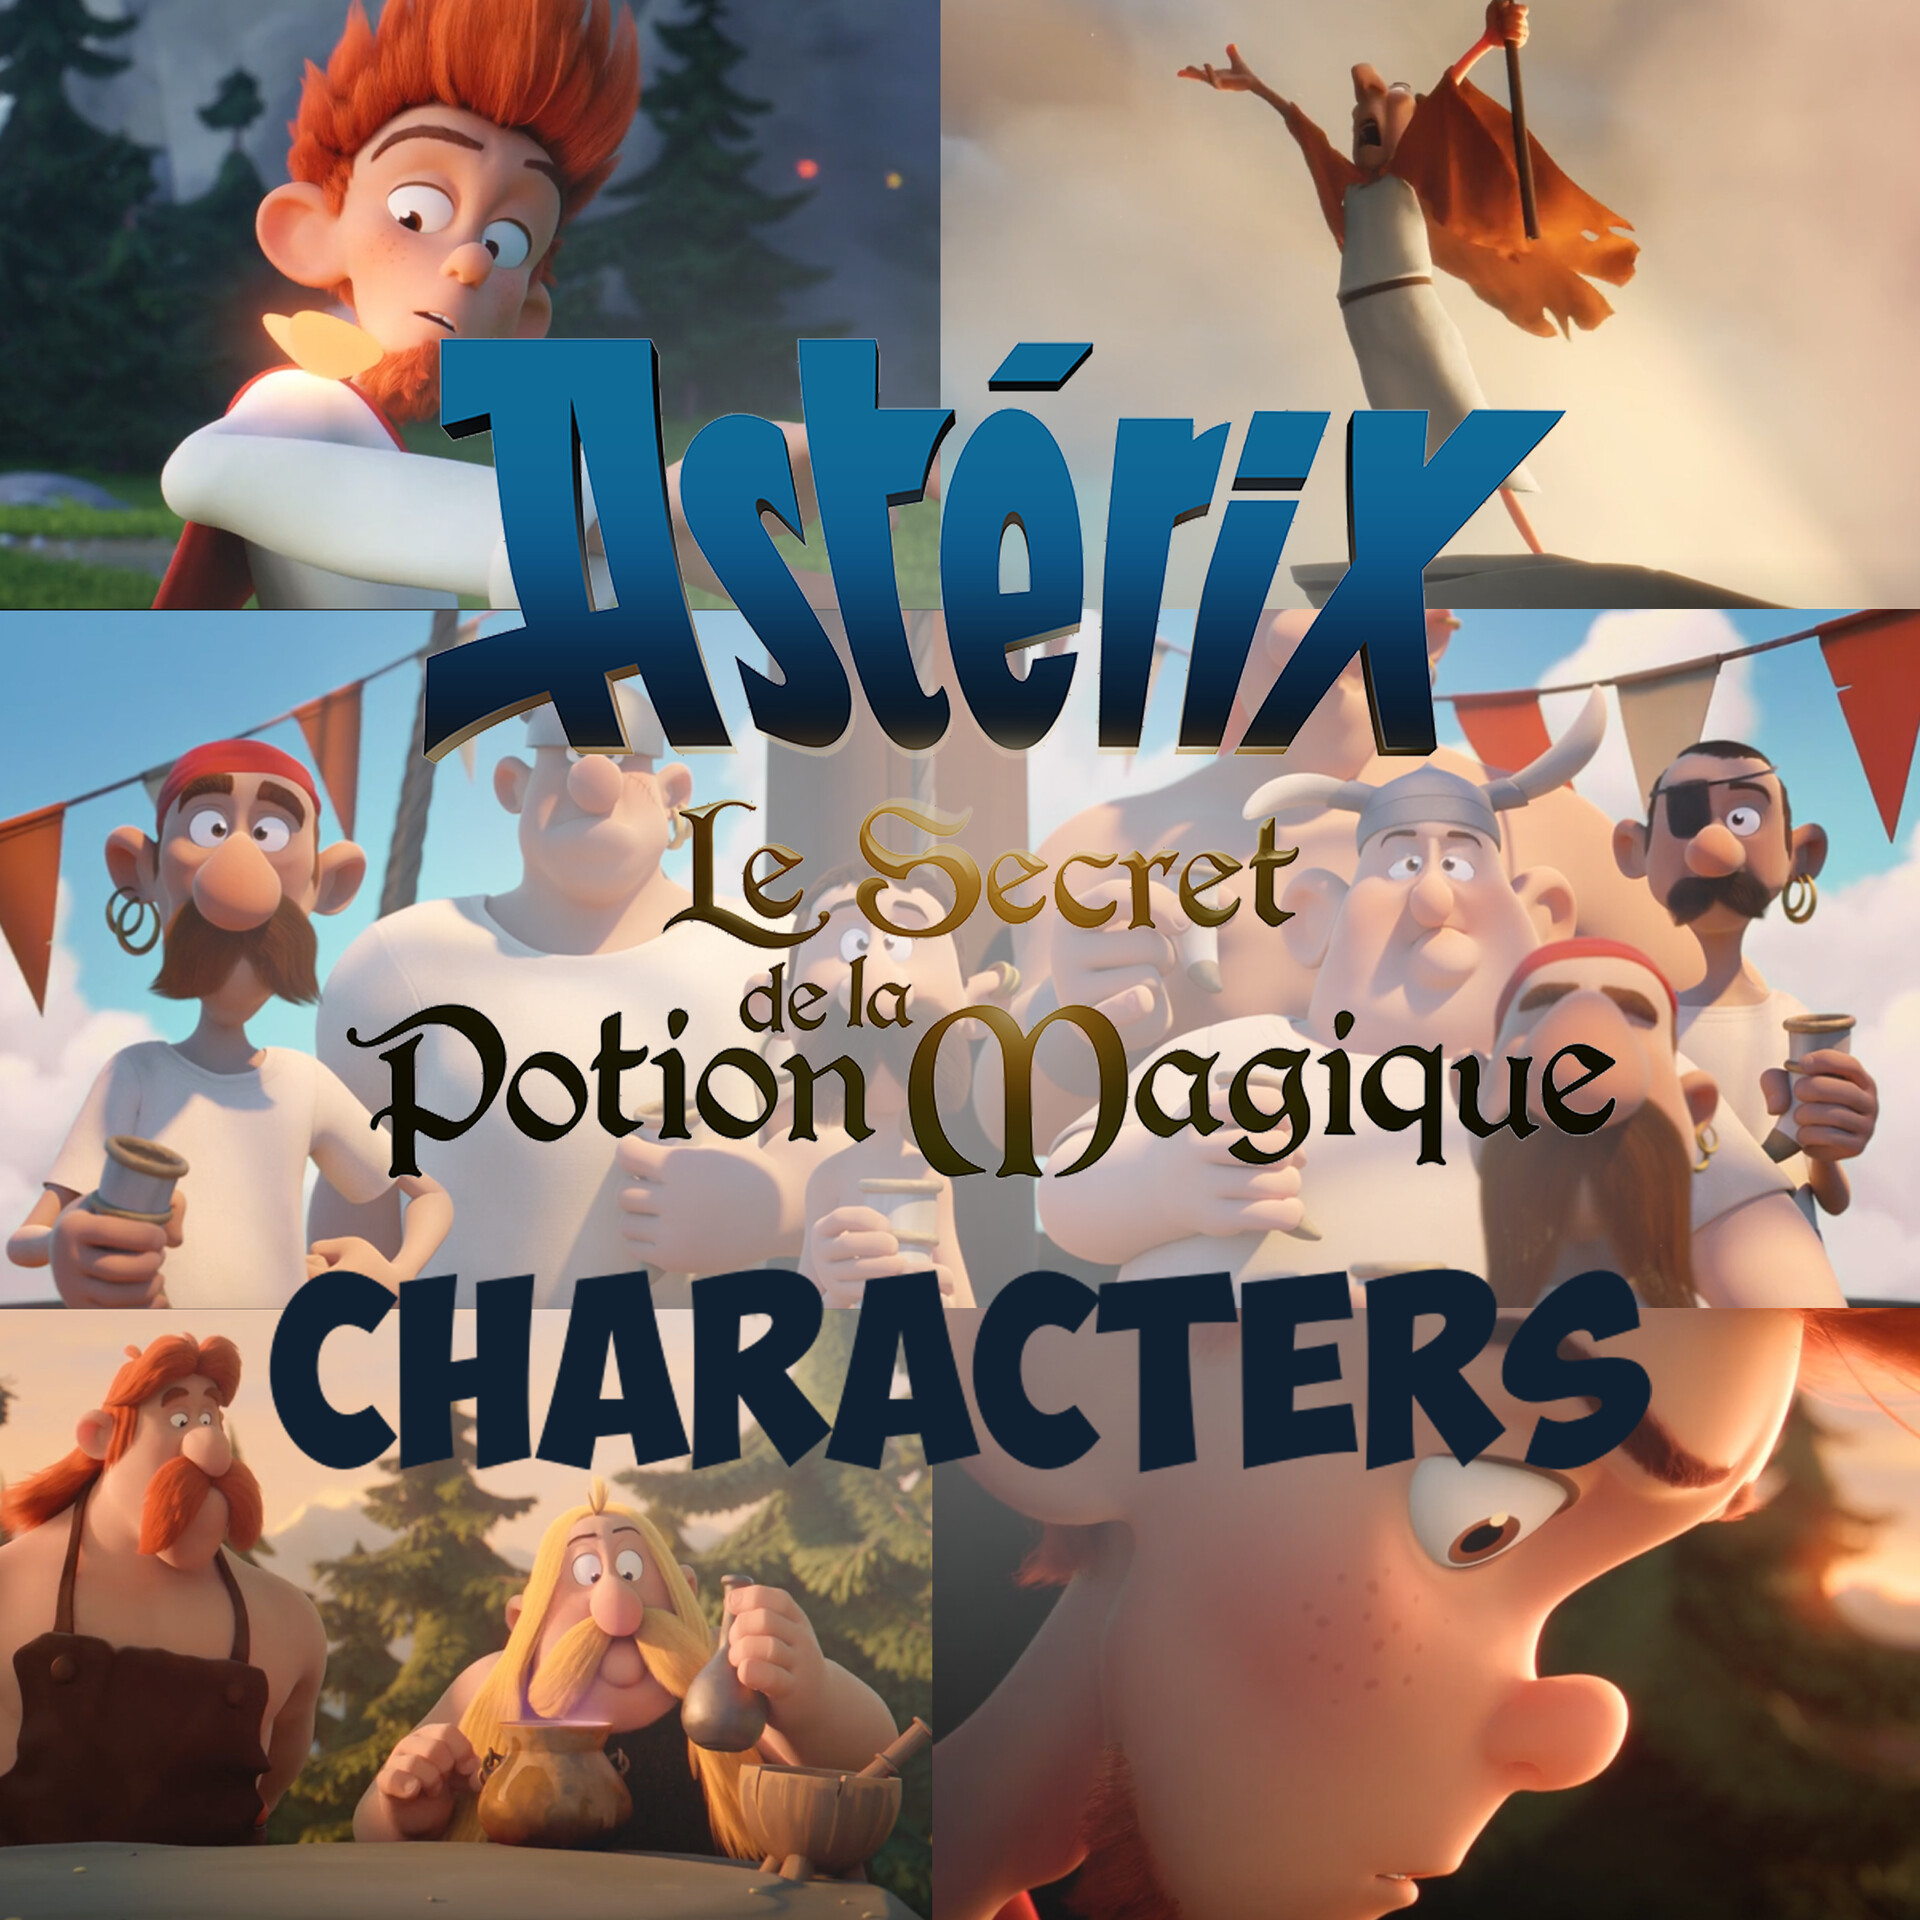 ASTERIX: THE SECRET OF THE MAGIC POTION